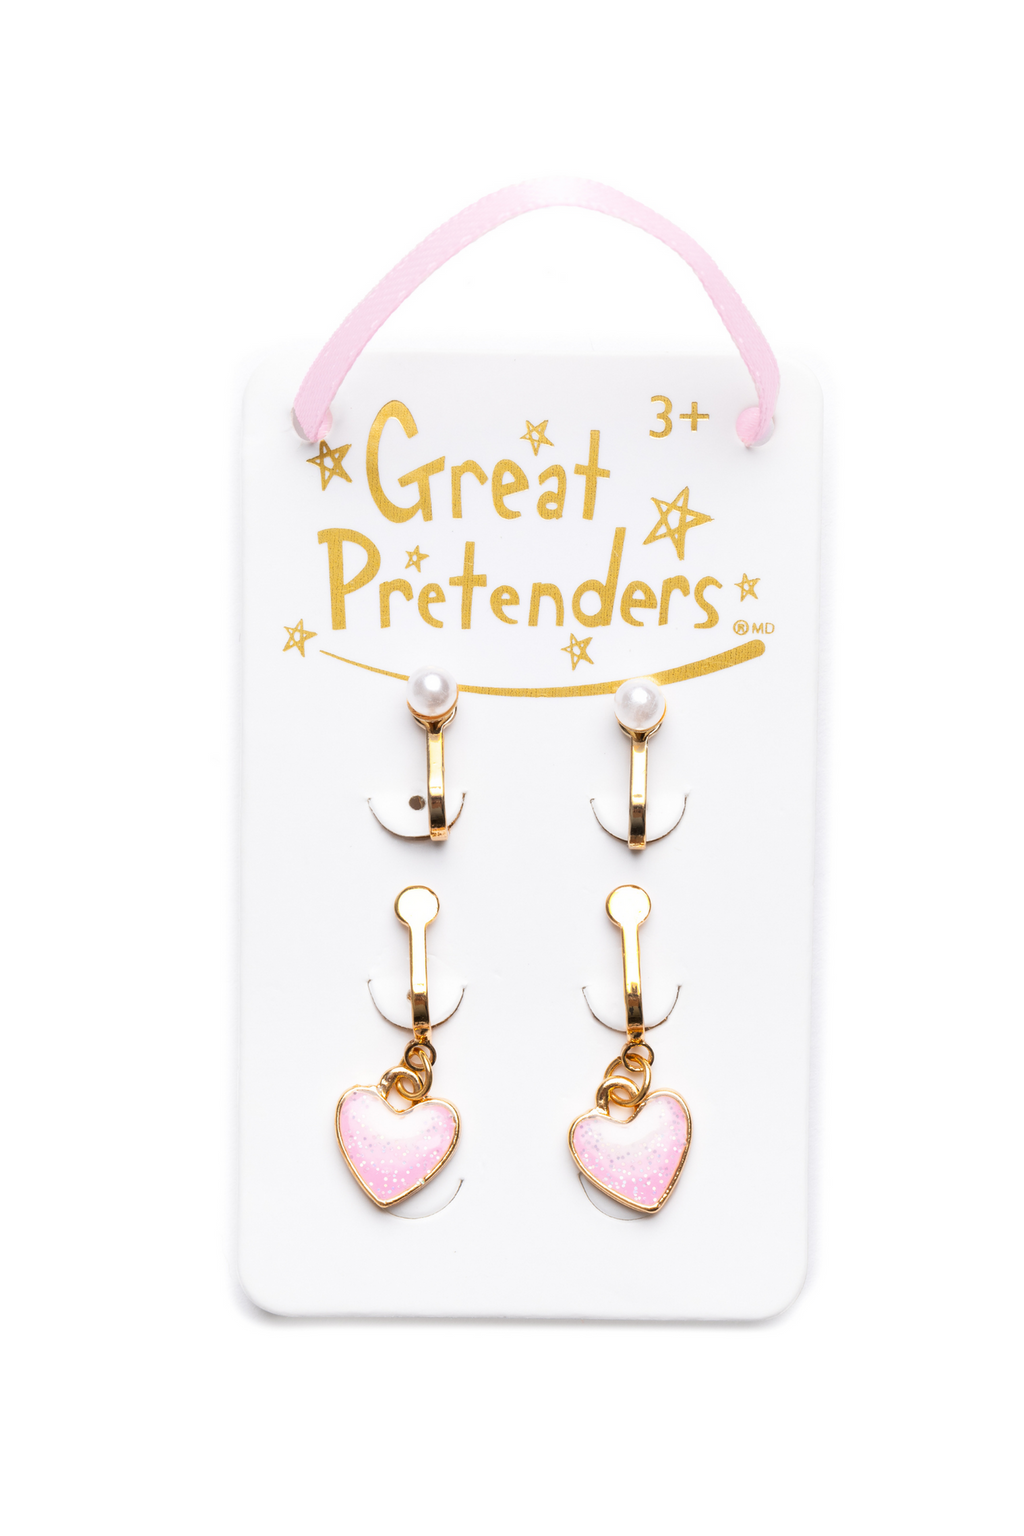 Great Pretenders Jewelry - Boutique Cute & Classy Studded Earring Set-Mountain Baby